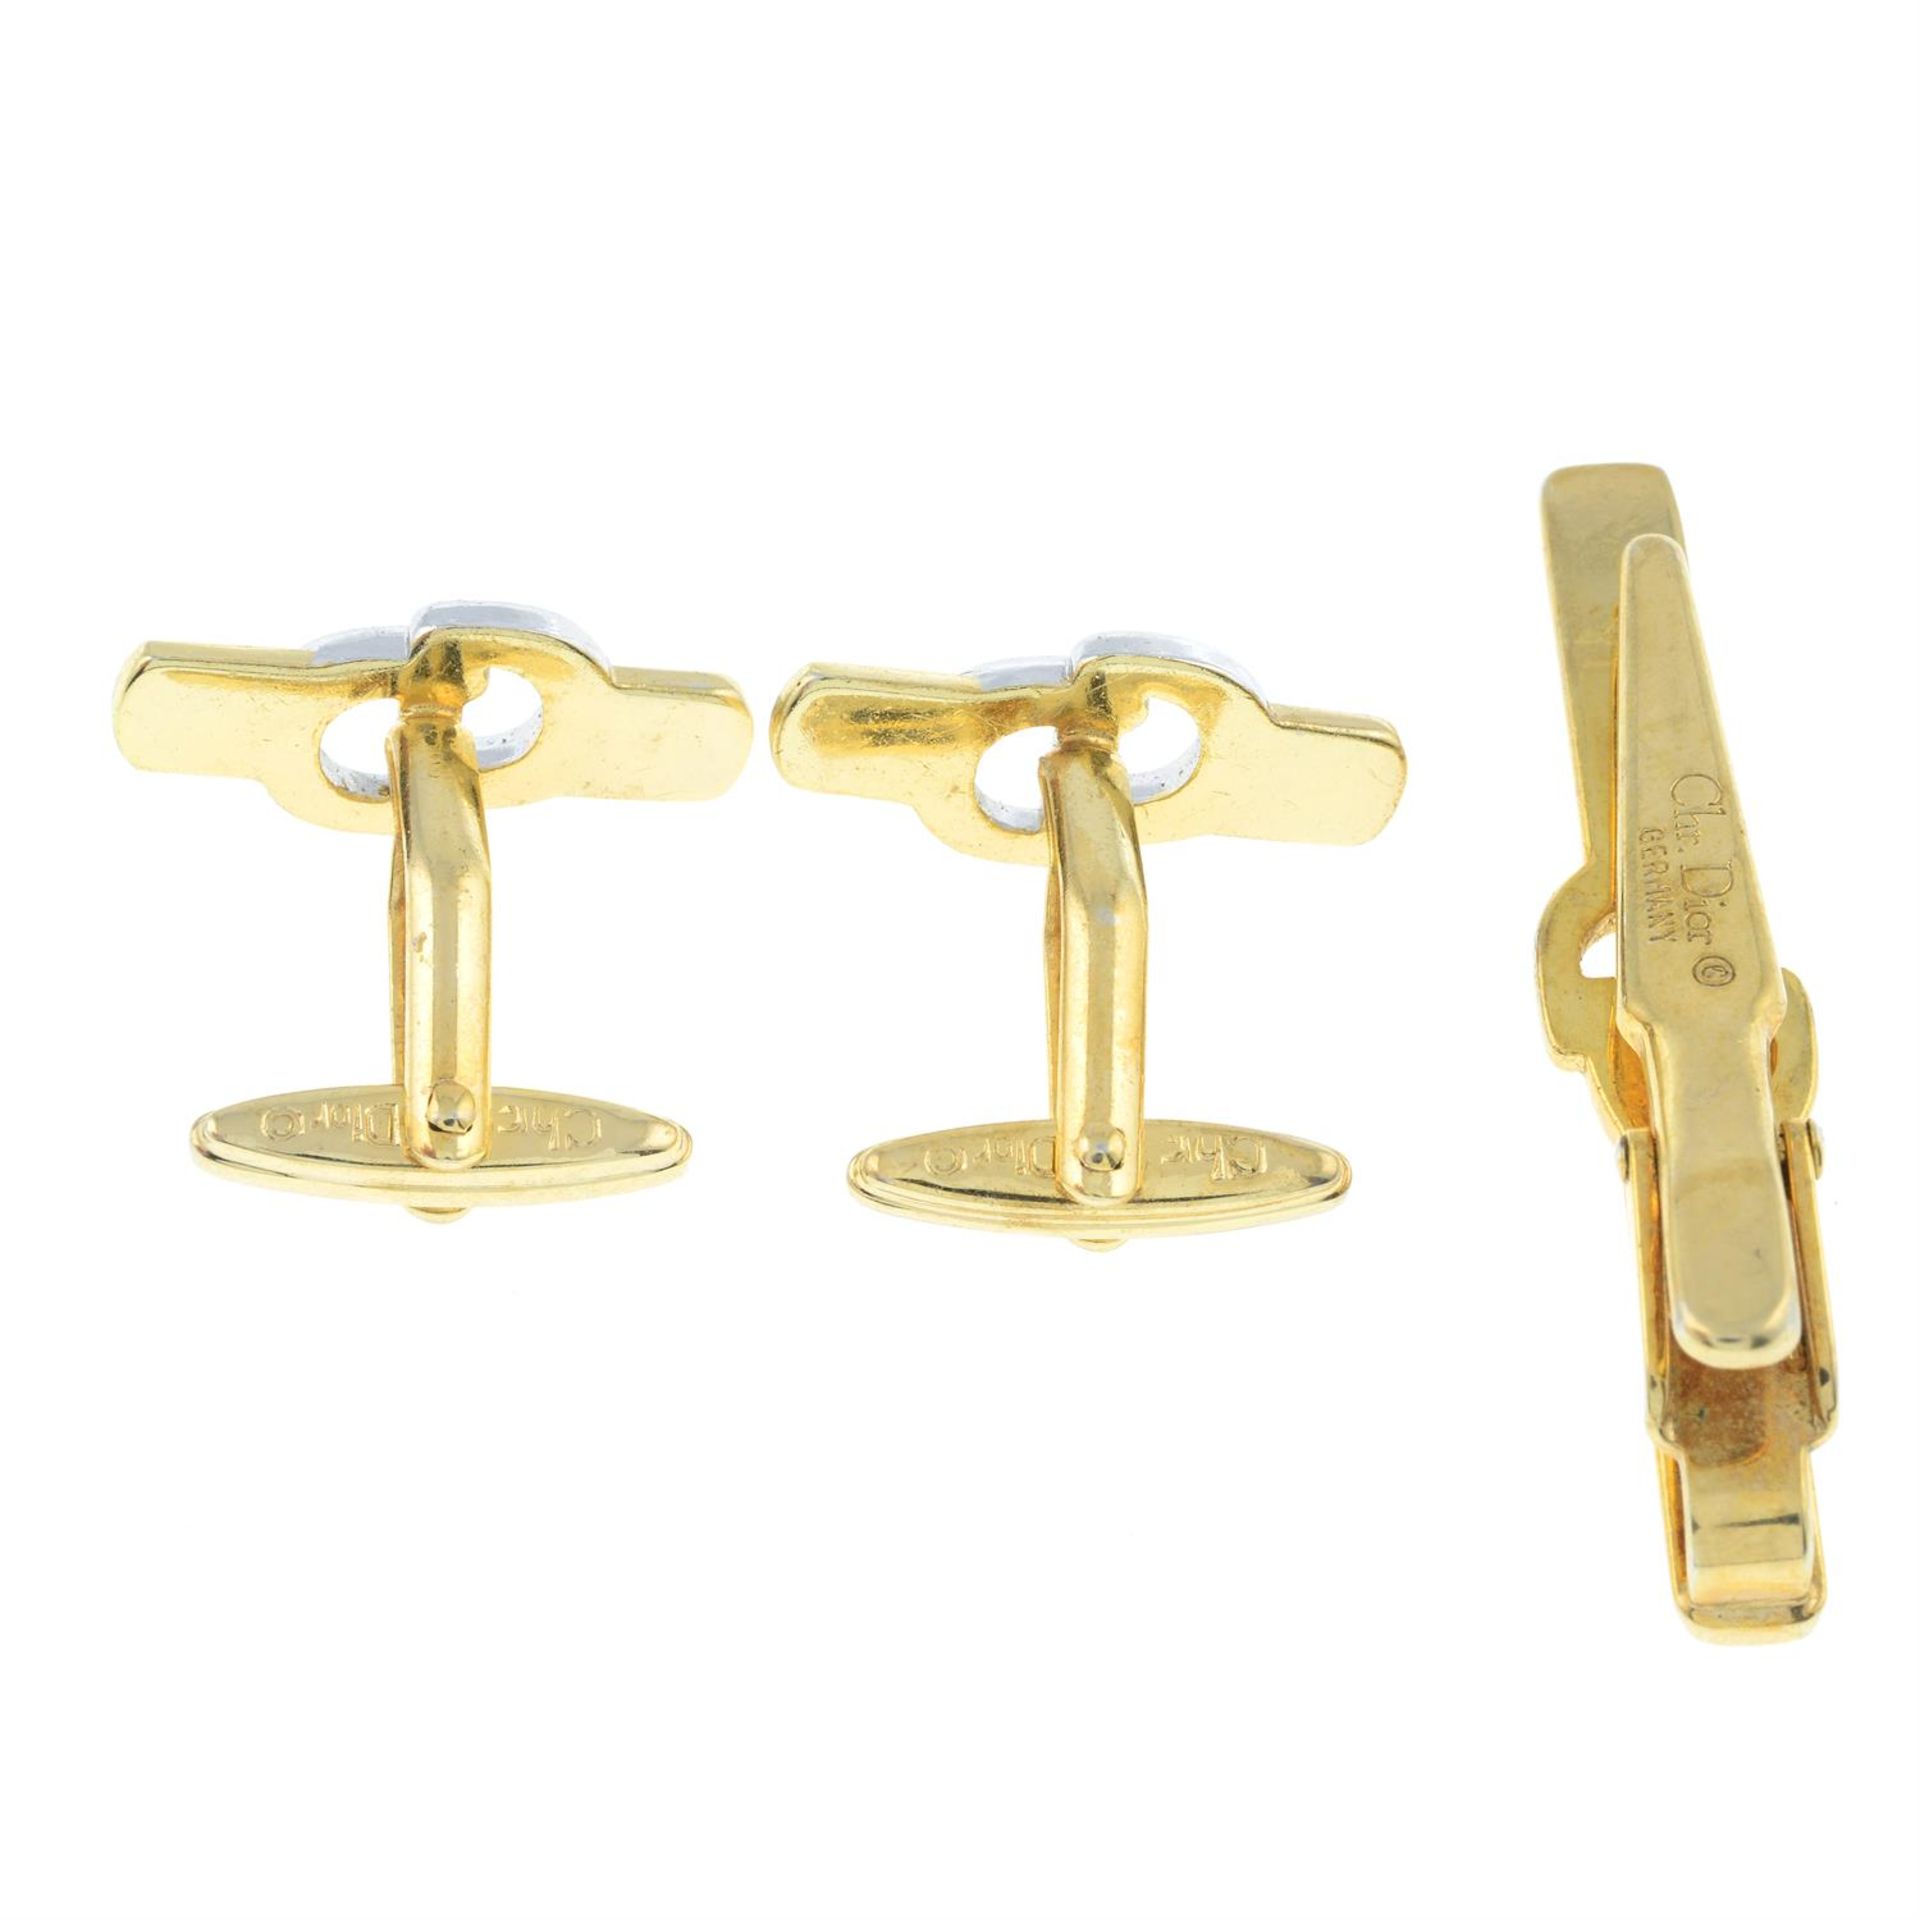 CHRISTIAN DIOR- a pair of cufflinks together with a tie clip. - Image 2 of 2